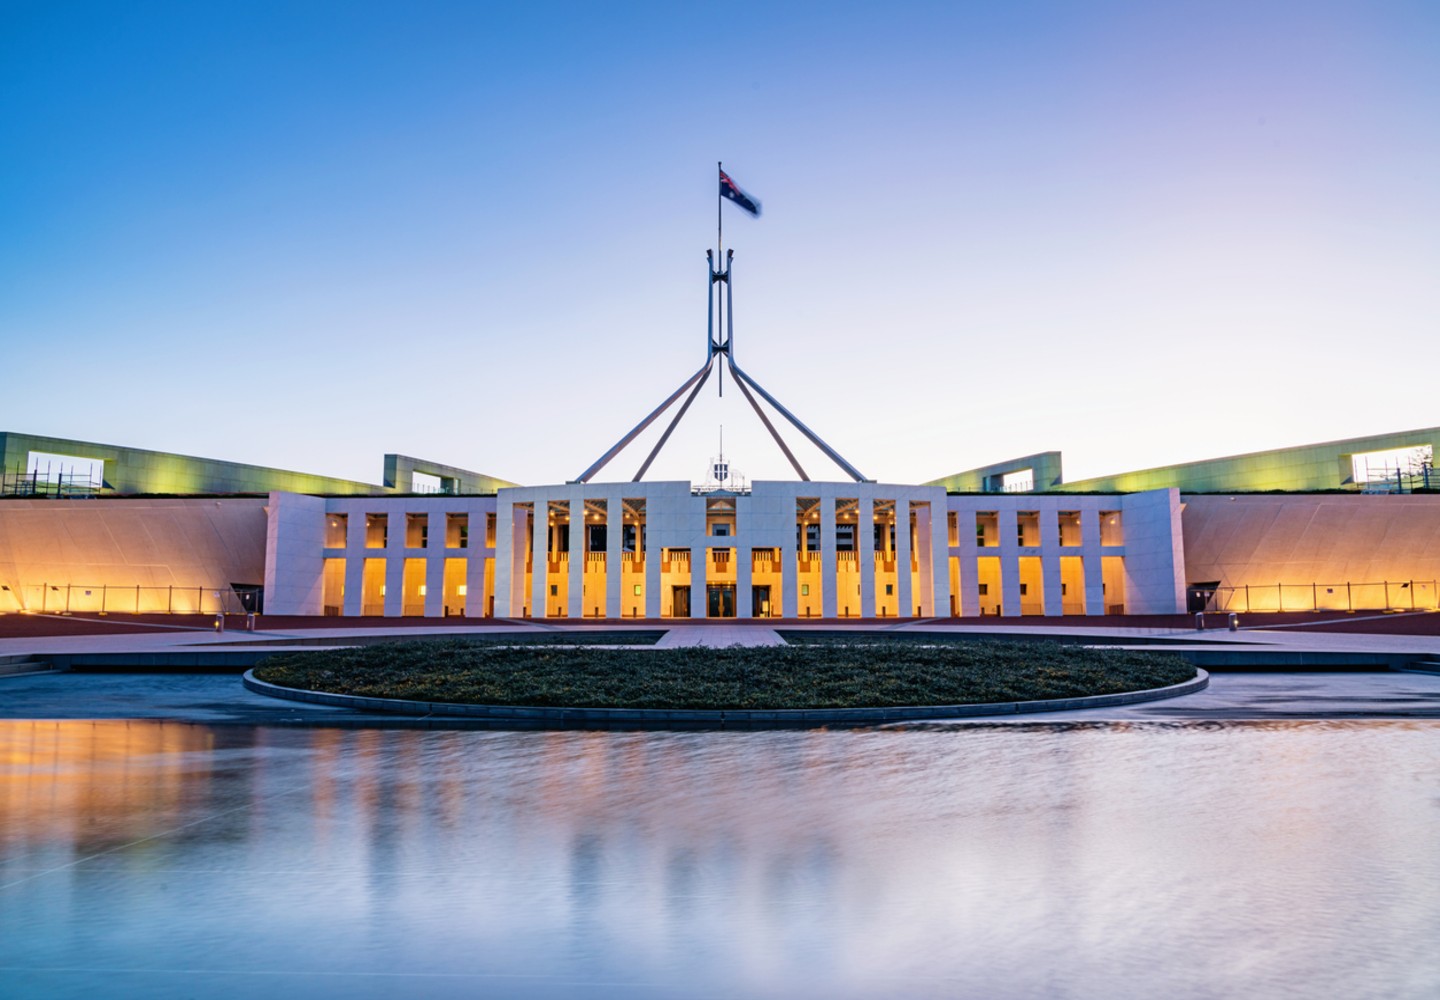 Inquiry into online gambling and its impacts on those experiencing gambling harm